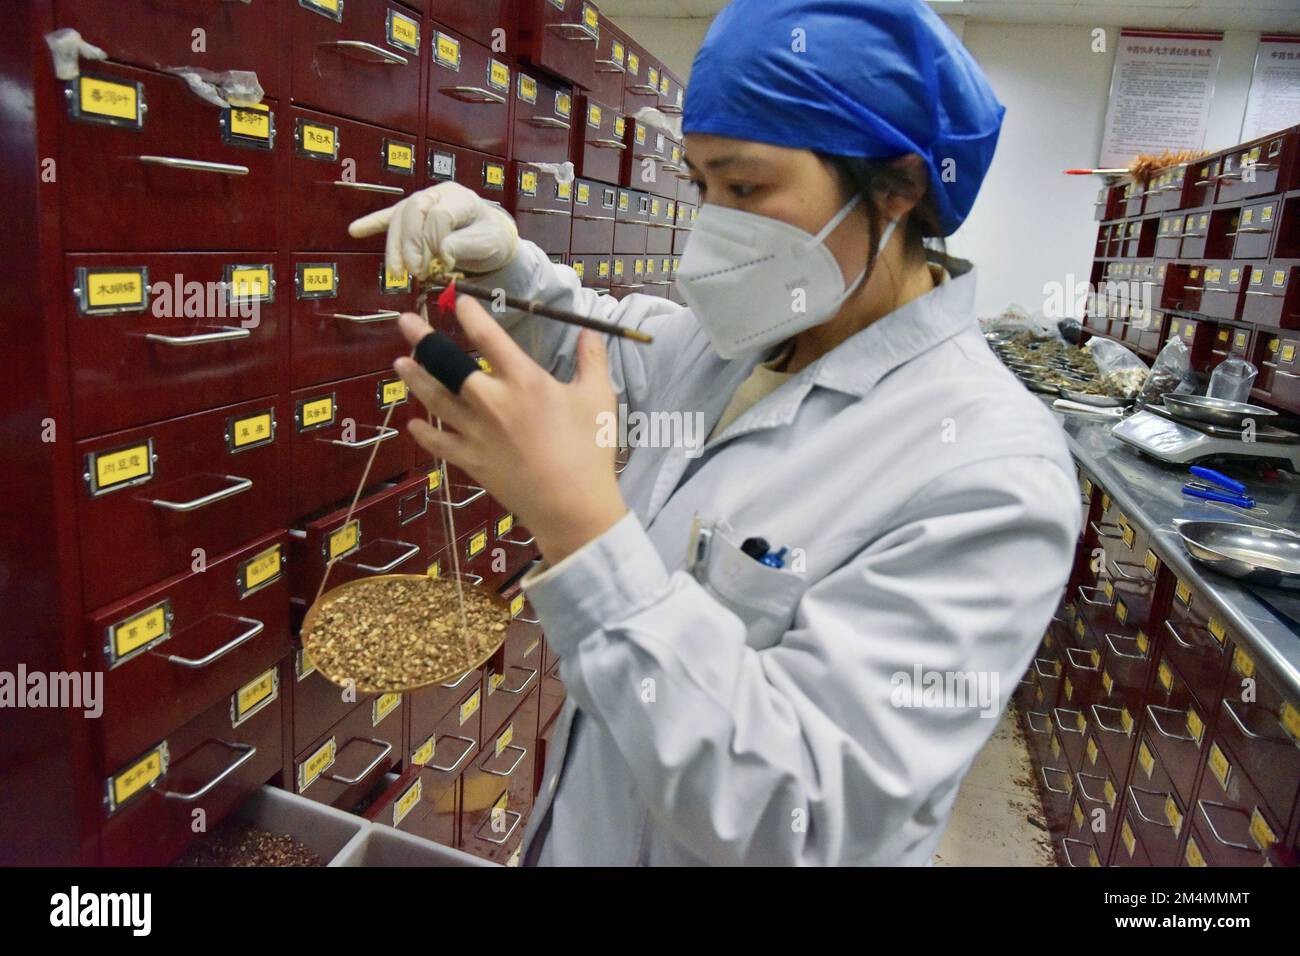 RUGAO, CHINA - DECEMBER 22, 2022 - A traditional Chinese medicine practitioner weighs herbs for mixing traditional Chinese medicine prescriptions at t Stock Photo